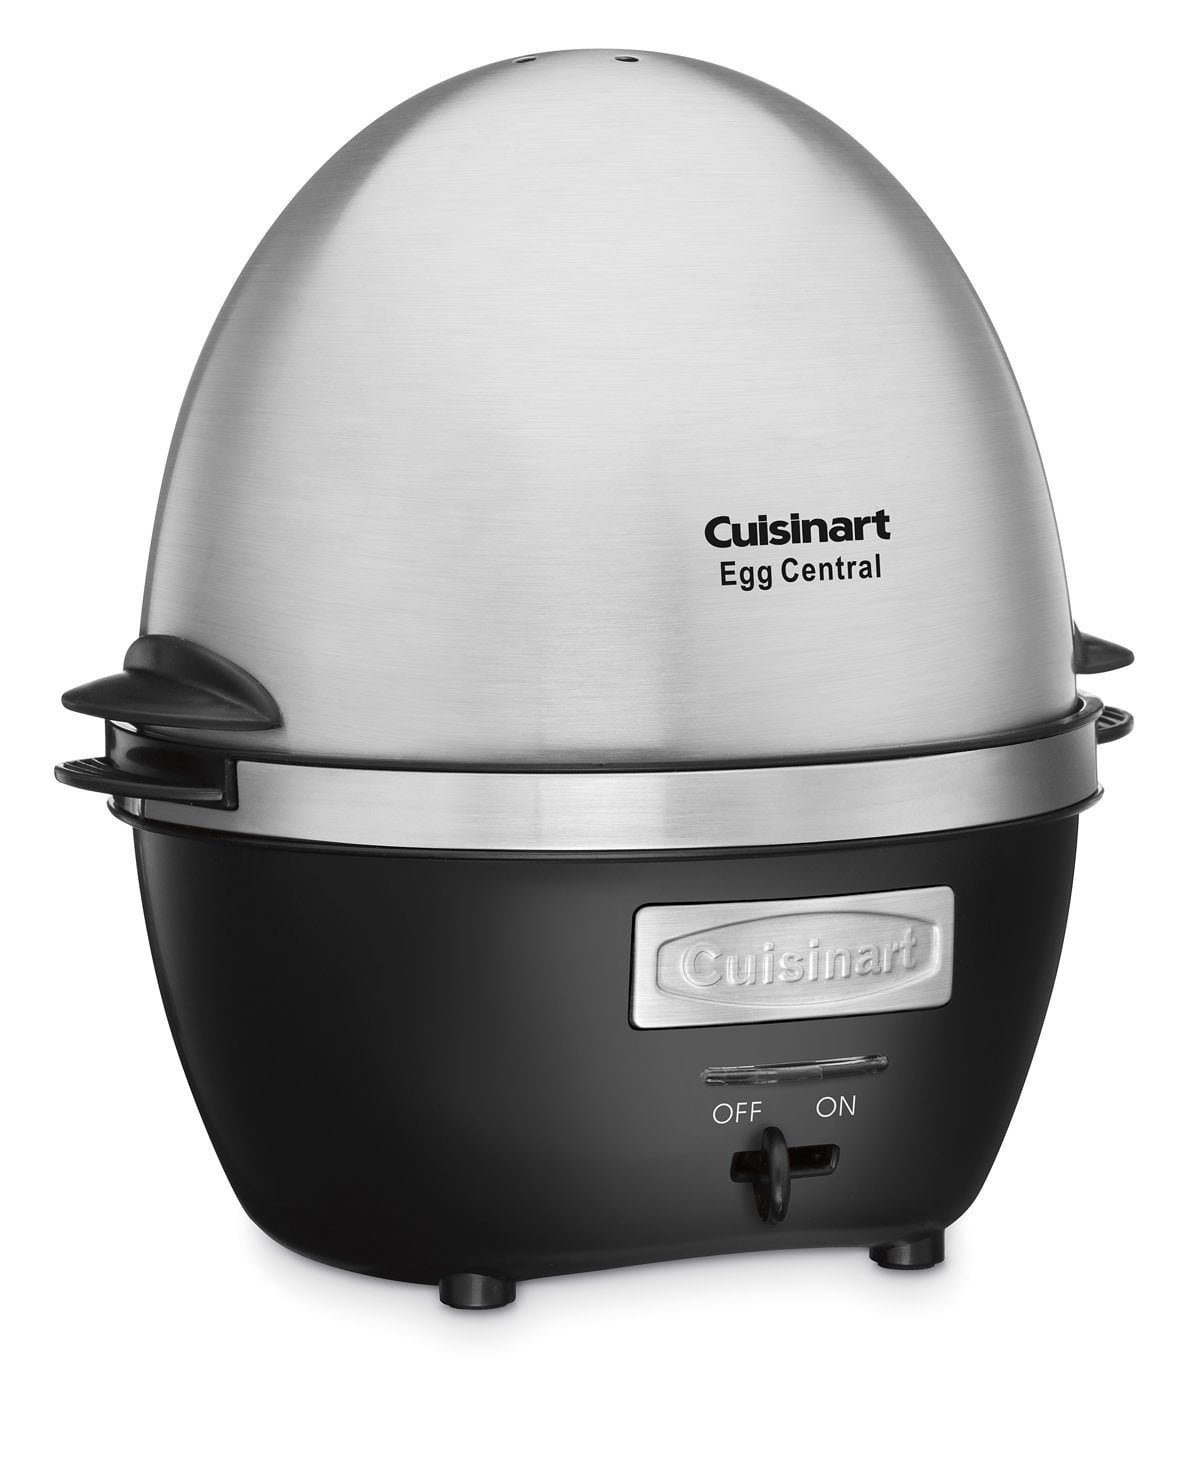 Cuisinart Egg Central  A Useful Cooking Robot? 